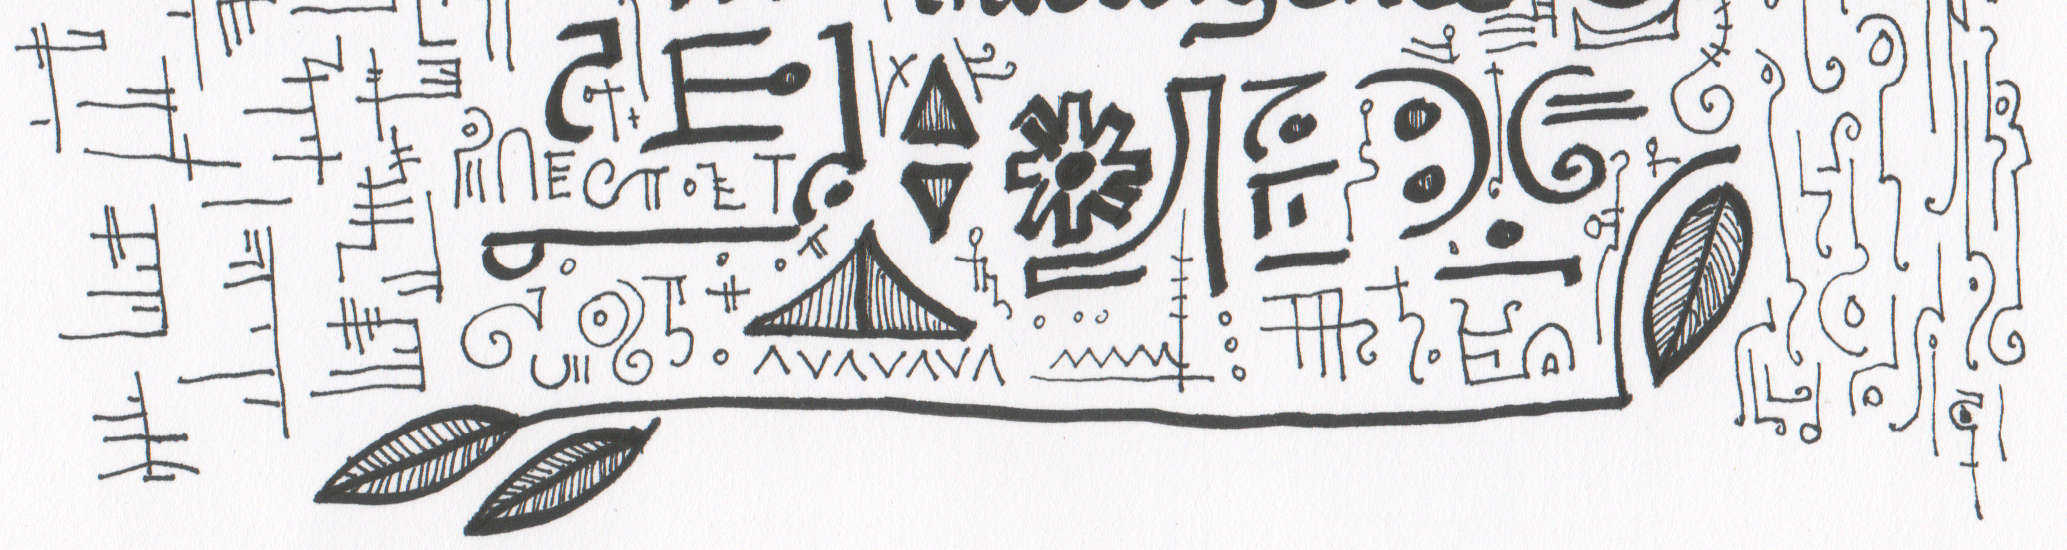 Ink on paper drawing of abstract letter like shapes along with a simplified gear, bridge, triangles and leaves.